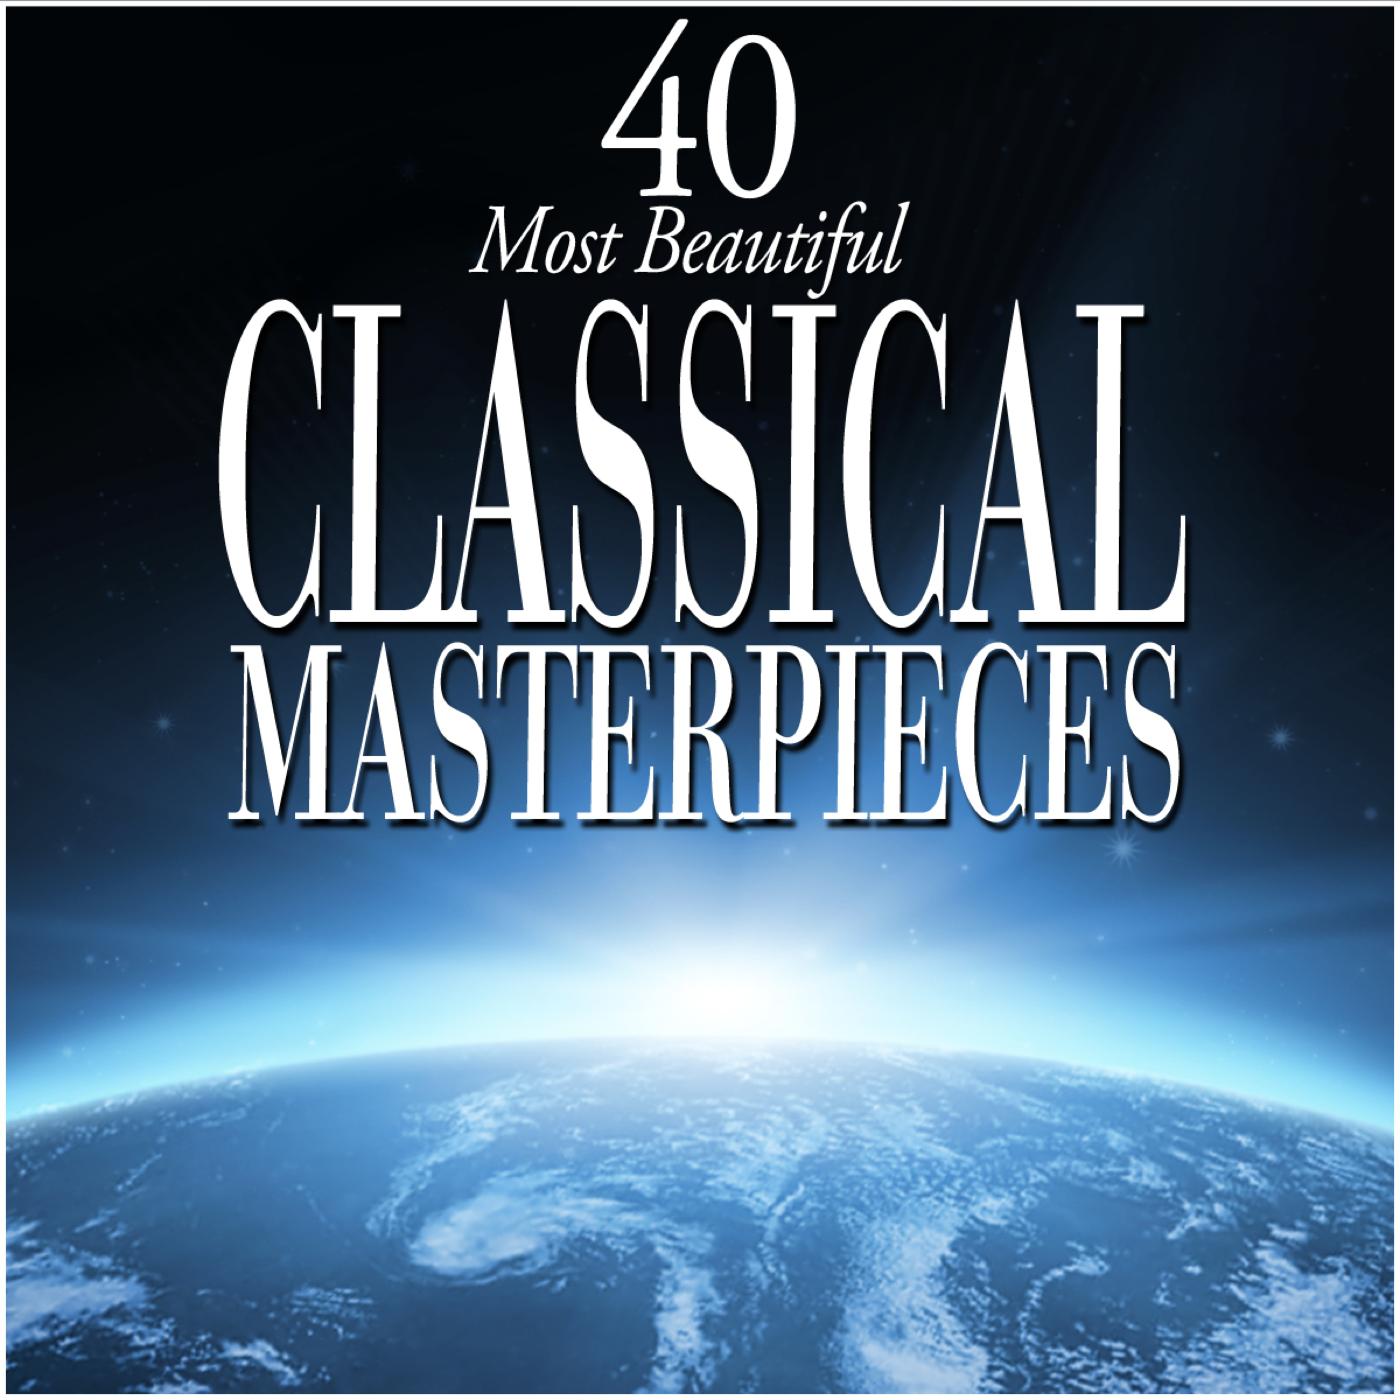 40 Most Beautiful Classical Masterpieces